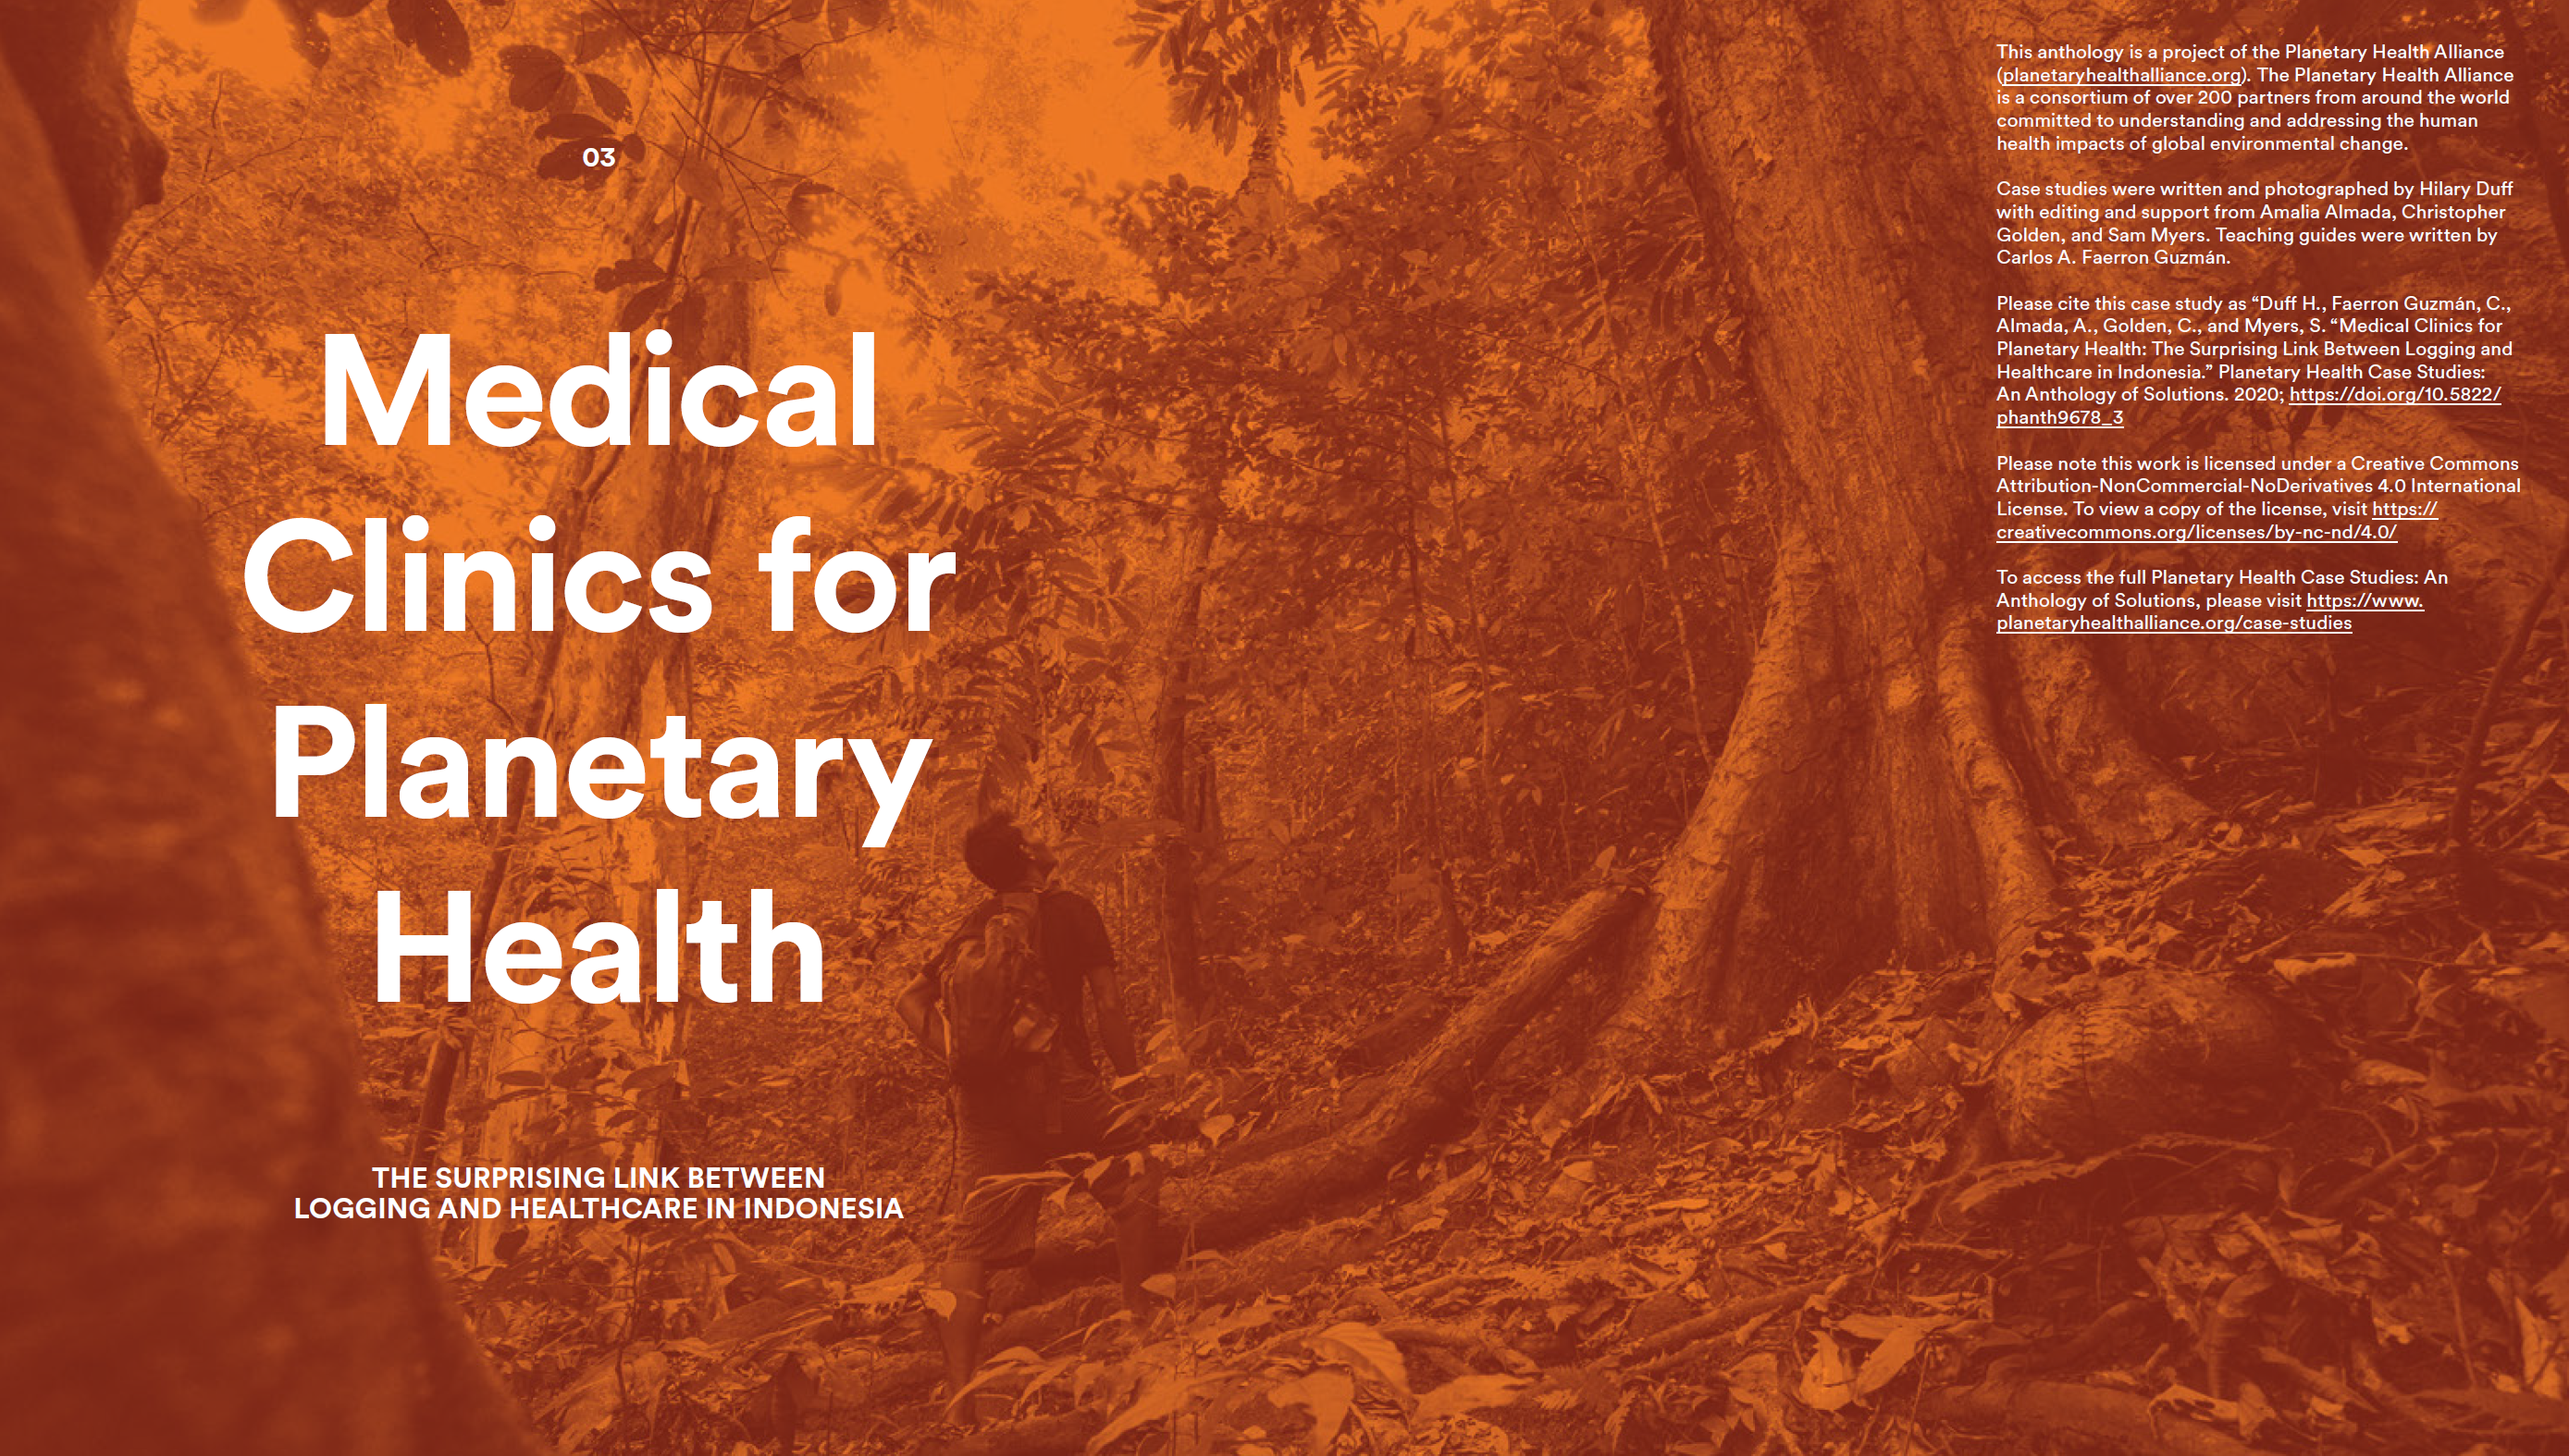 Case Study 03 - Medical Clinics for Planetary Health